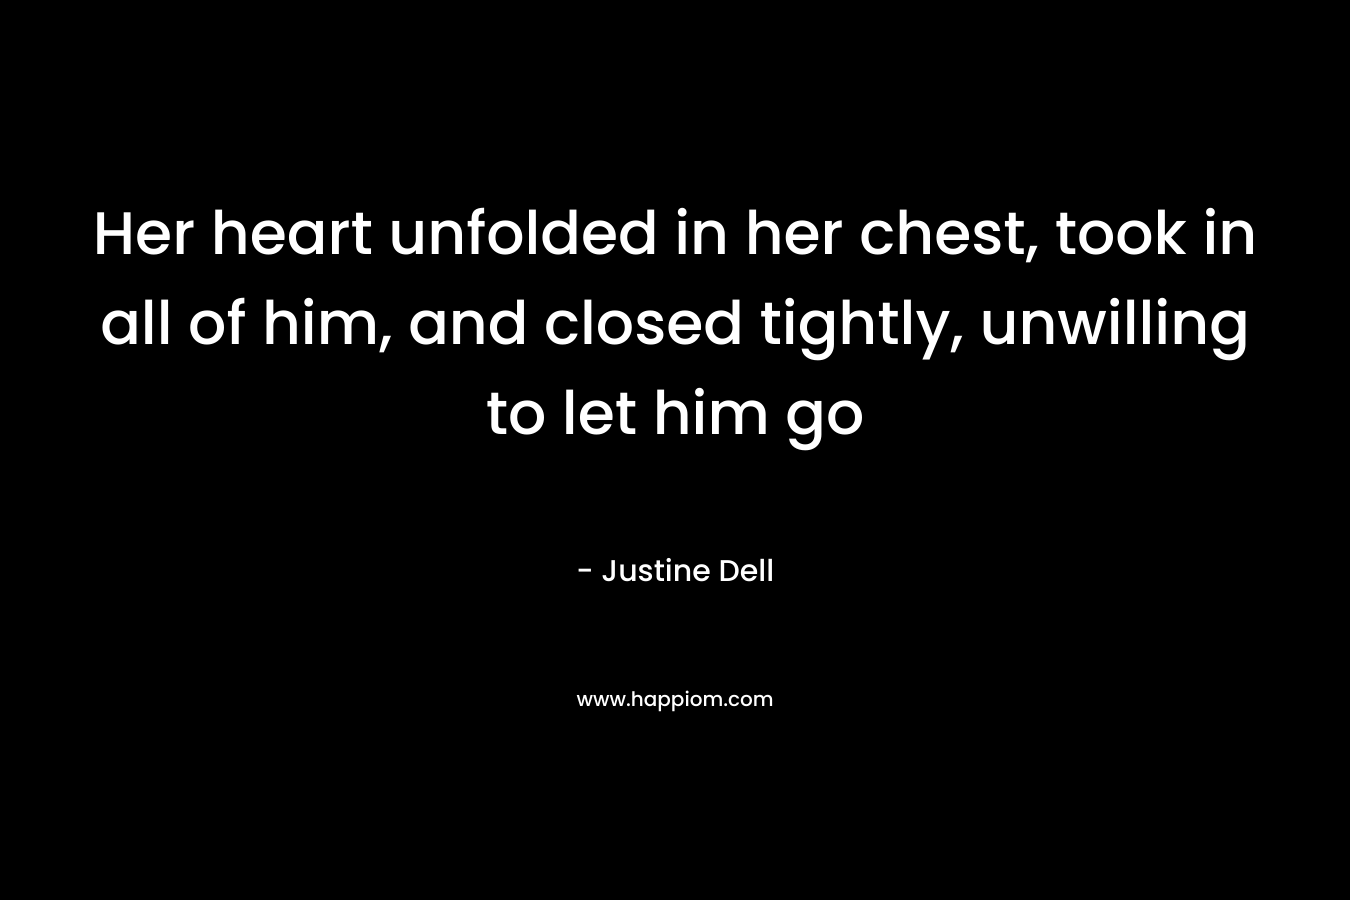 Her heart unfolded in her chest, took in all of him, and closed tightly, unwilling to let him go – Justine Dell